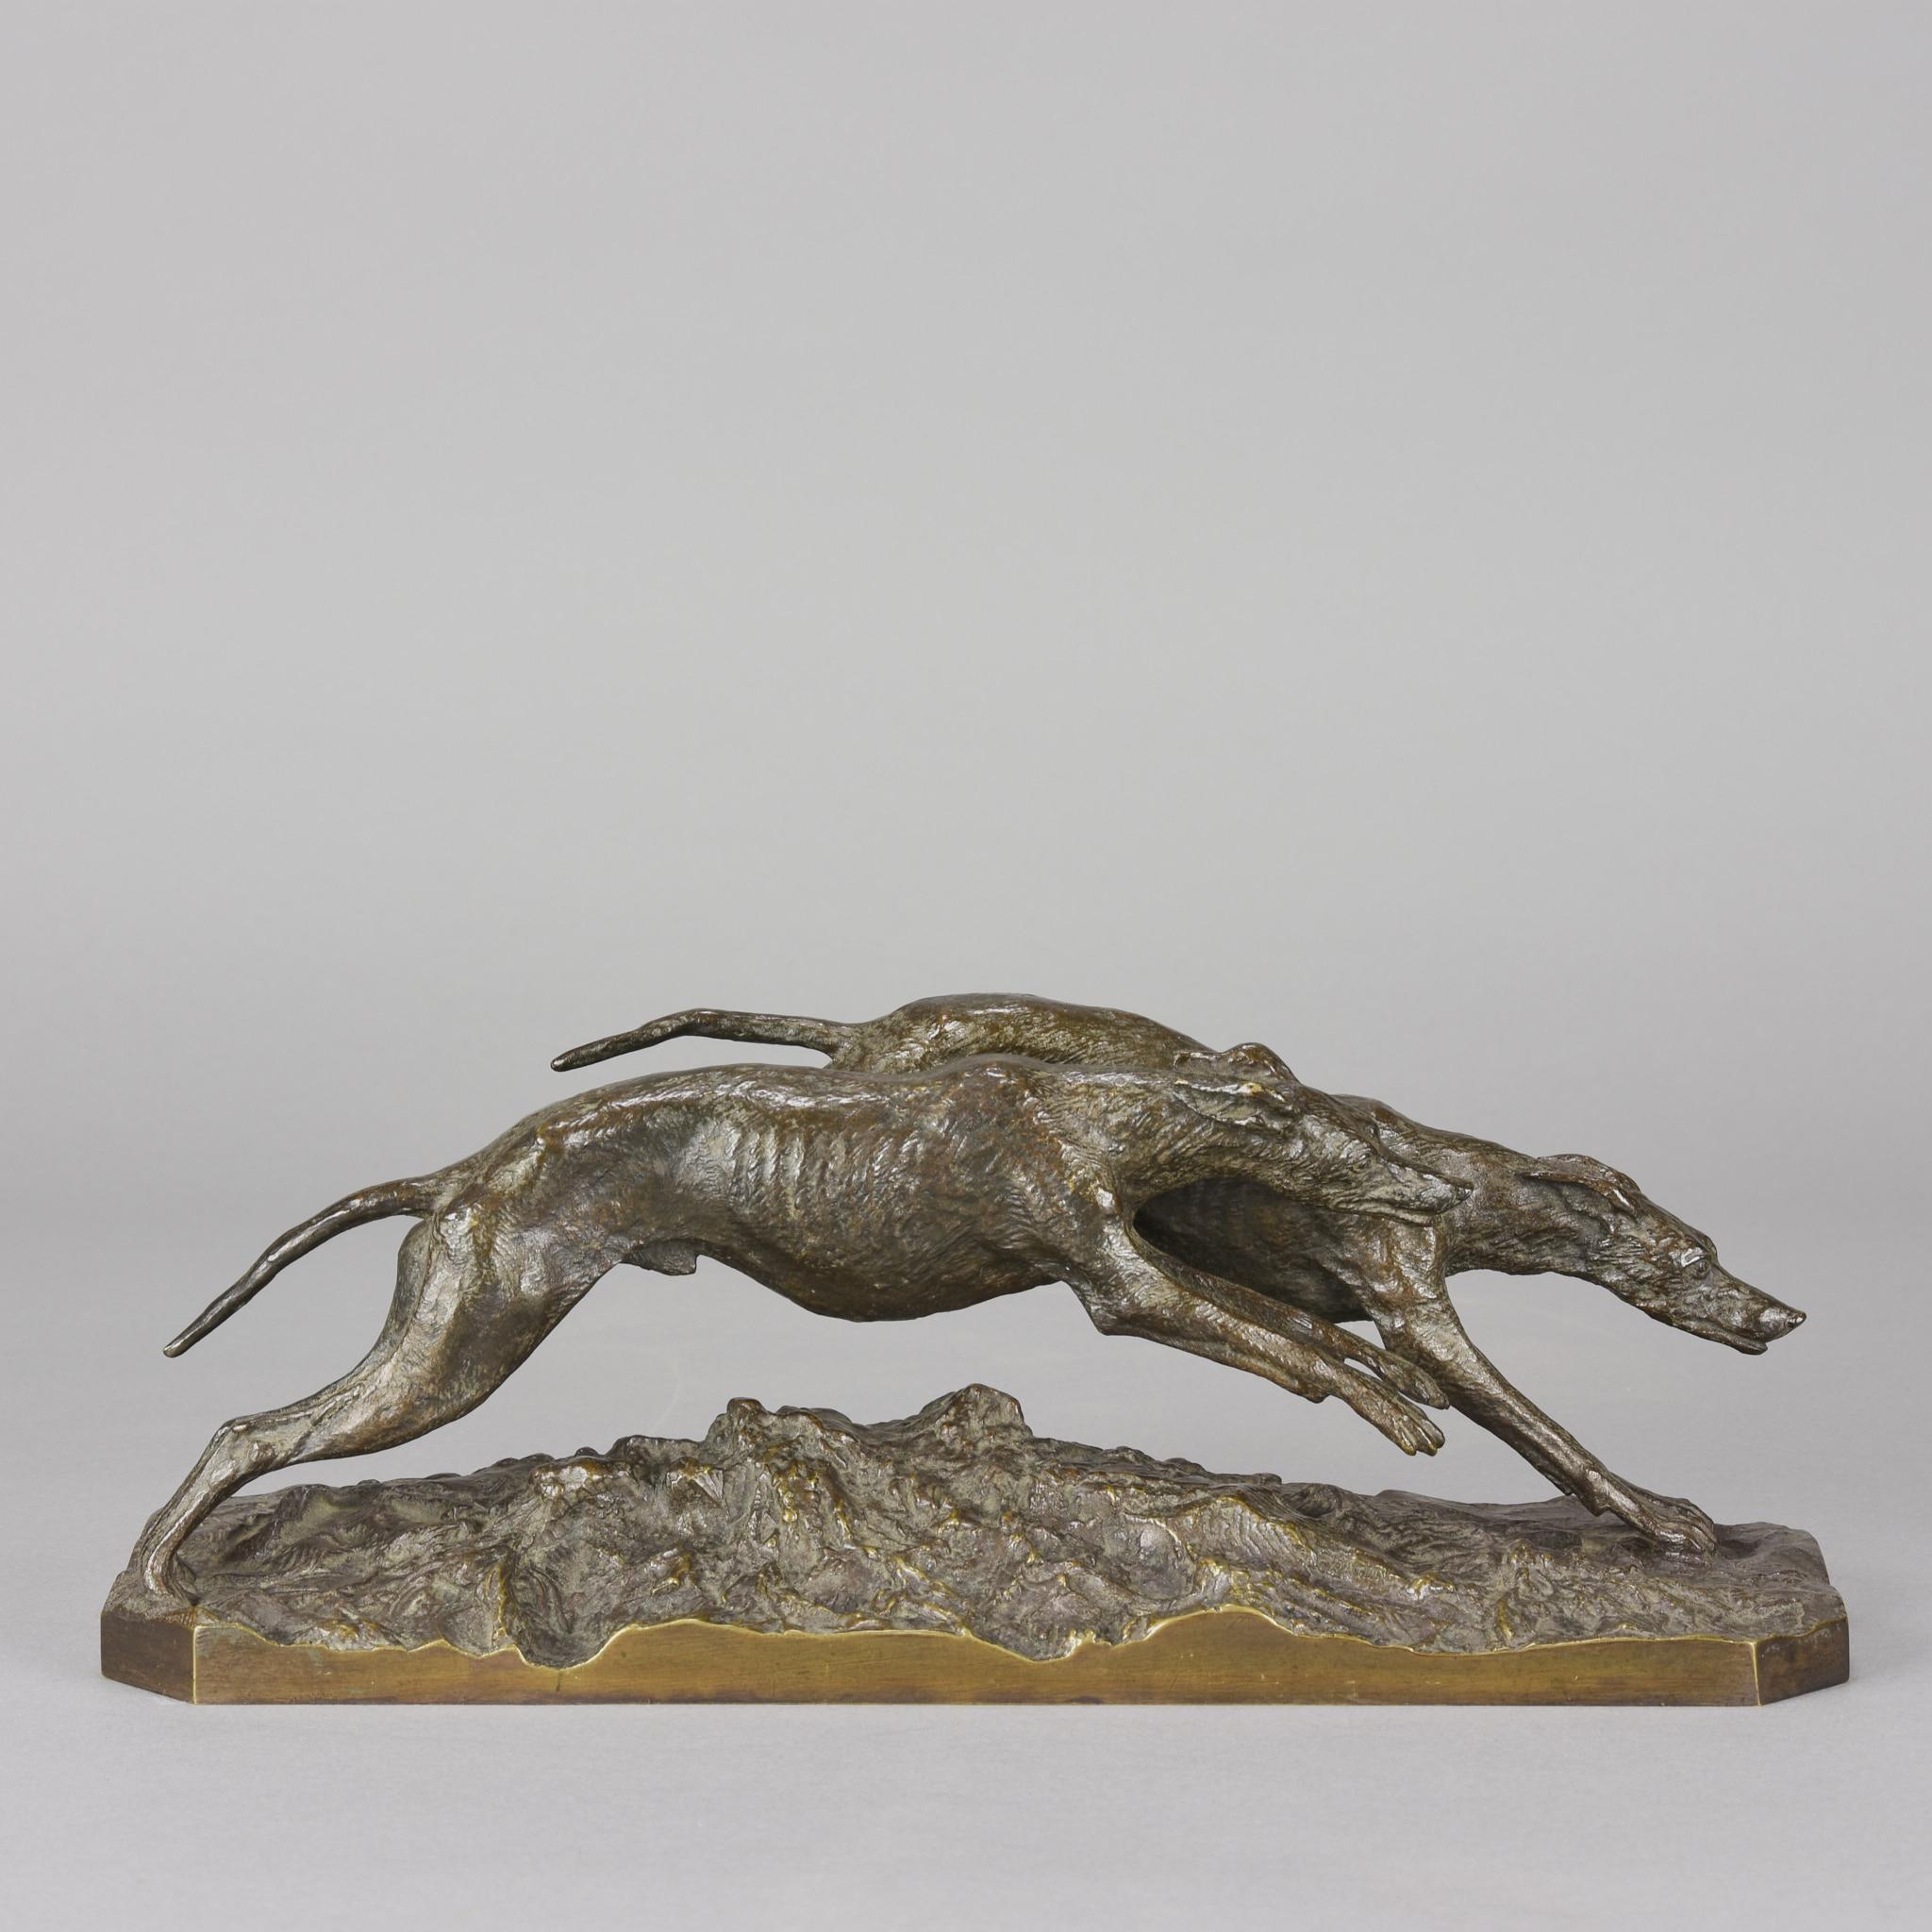 A fabulous Animalier bronze group of two racing greyhounds with excellent hand chased surface detail and appealing lightly worn golden brown patina, raised on a highly detailed naturalistic base, signed FRATIN. 
ADDITIONAL INFORMATION

Height: 11